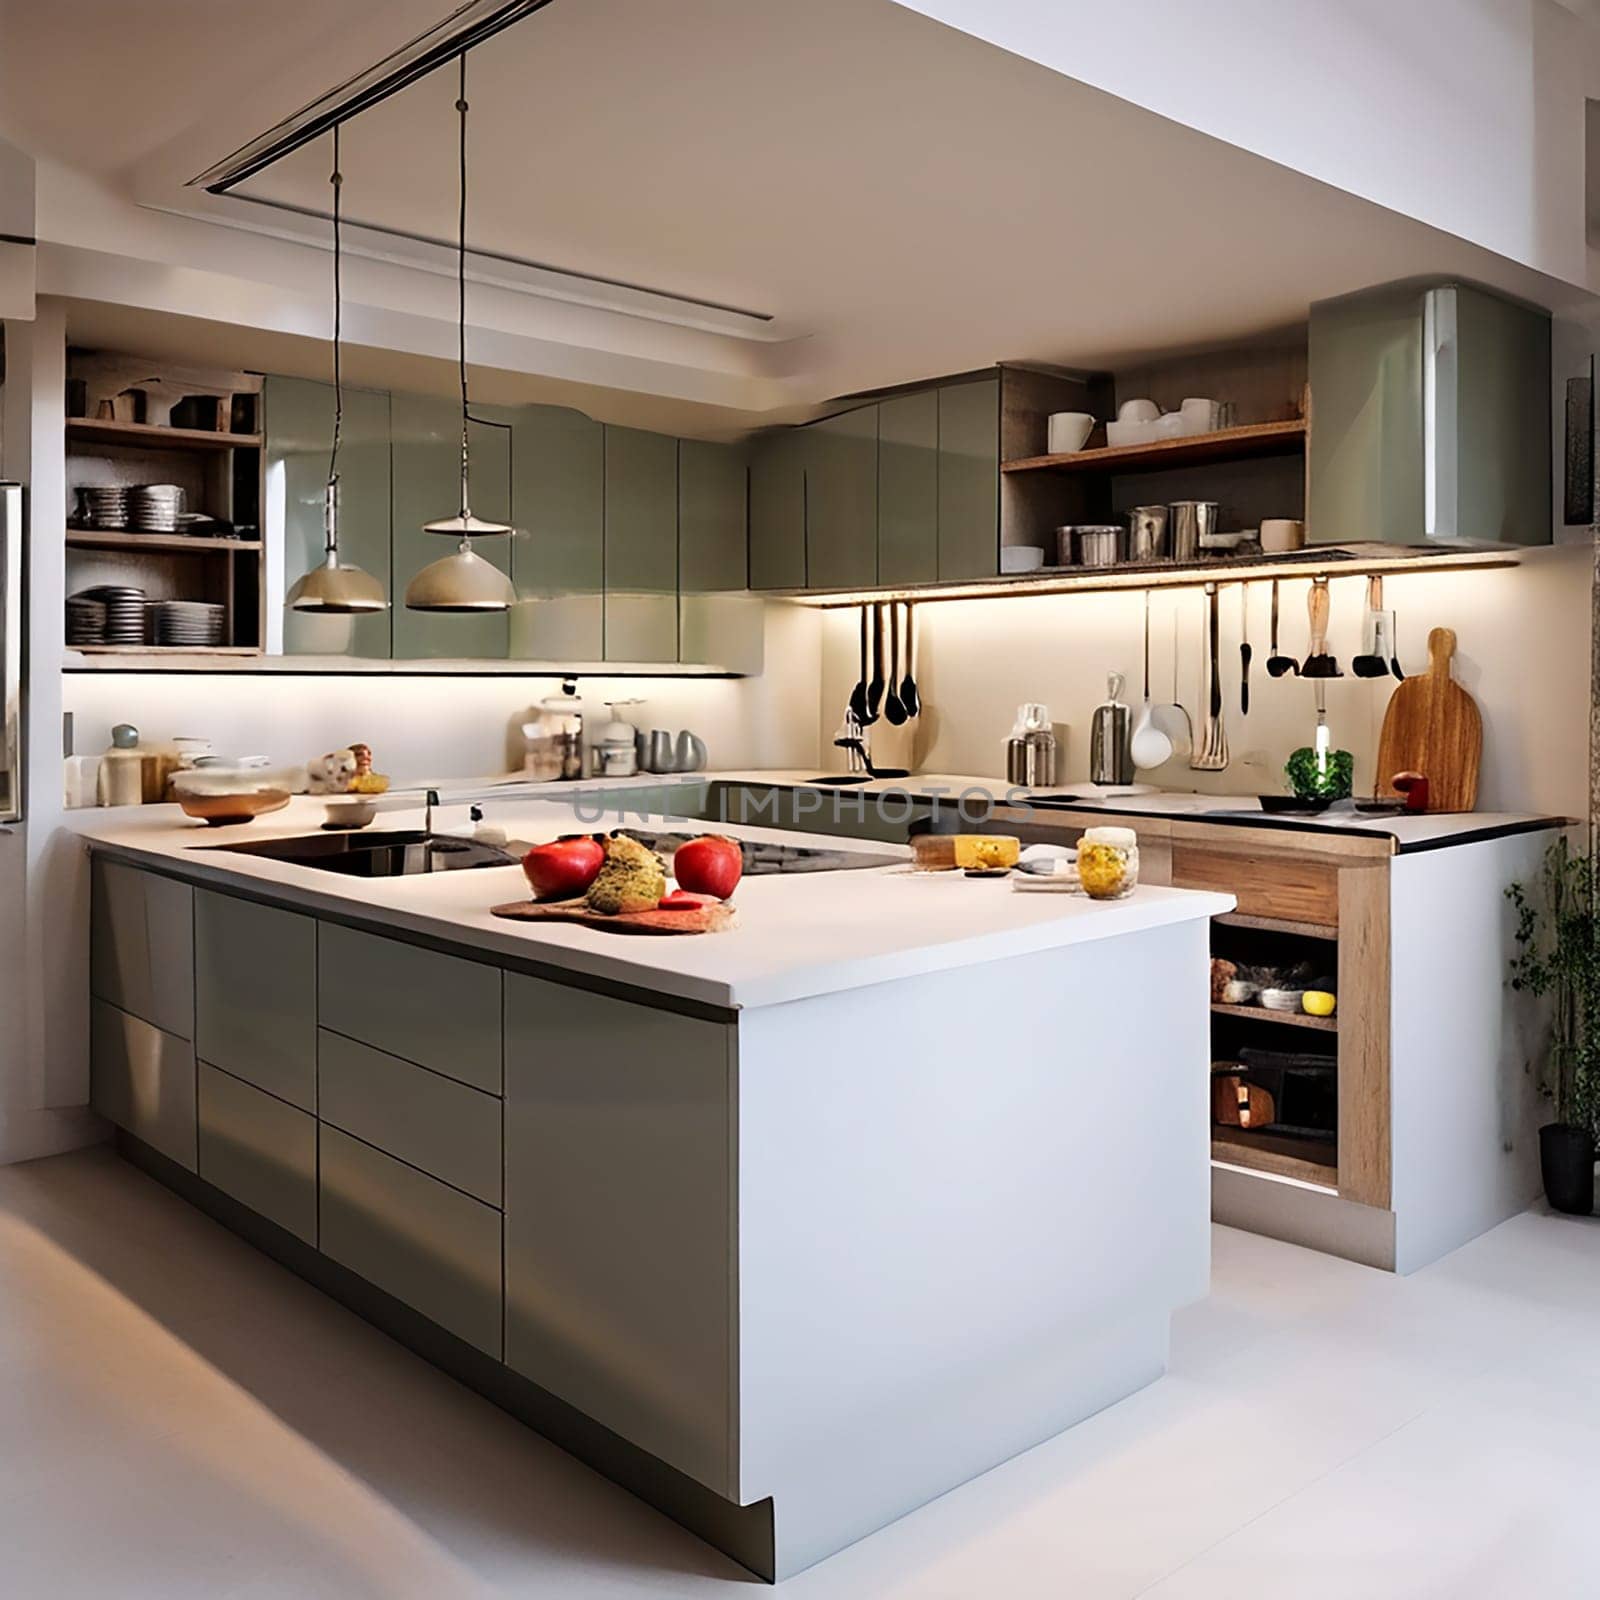 Creating a Cozy and Inviting Kitchen Space by Petrichor